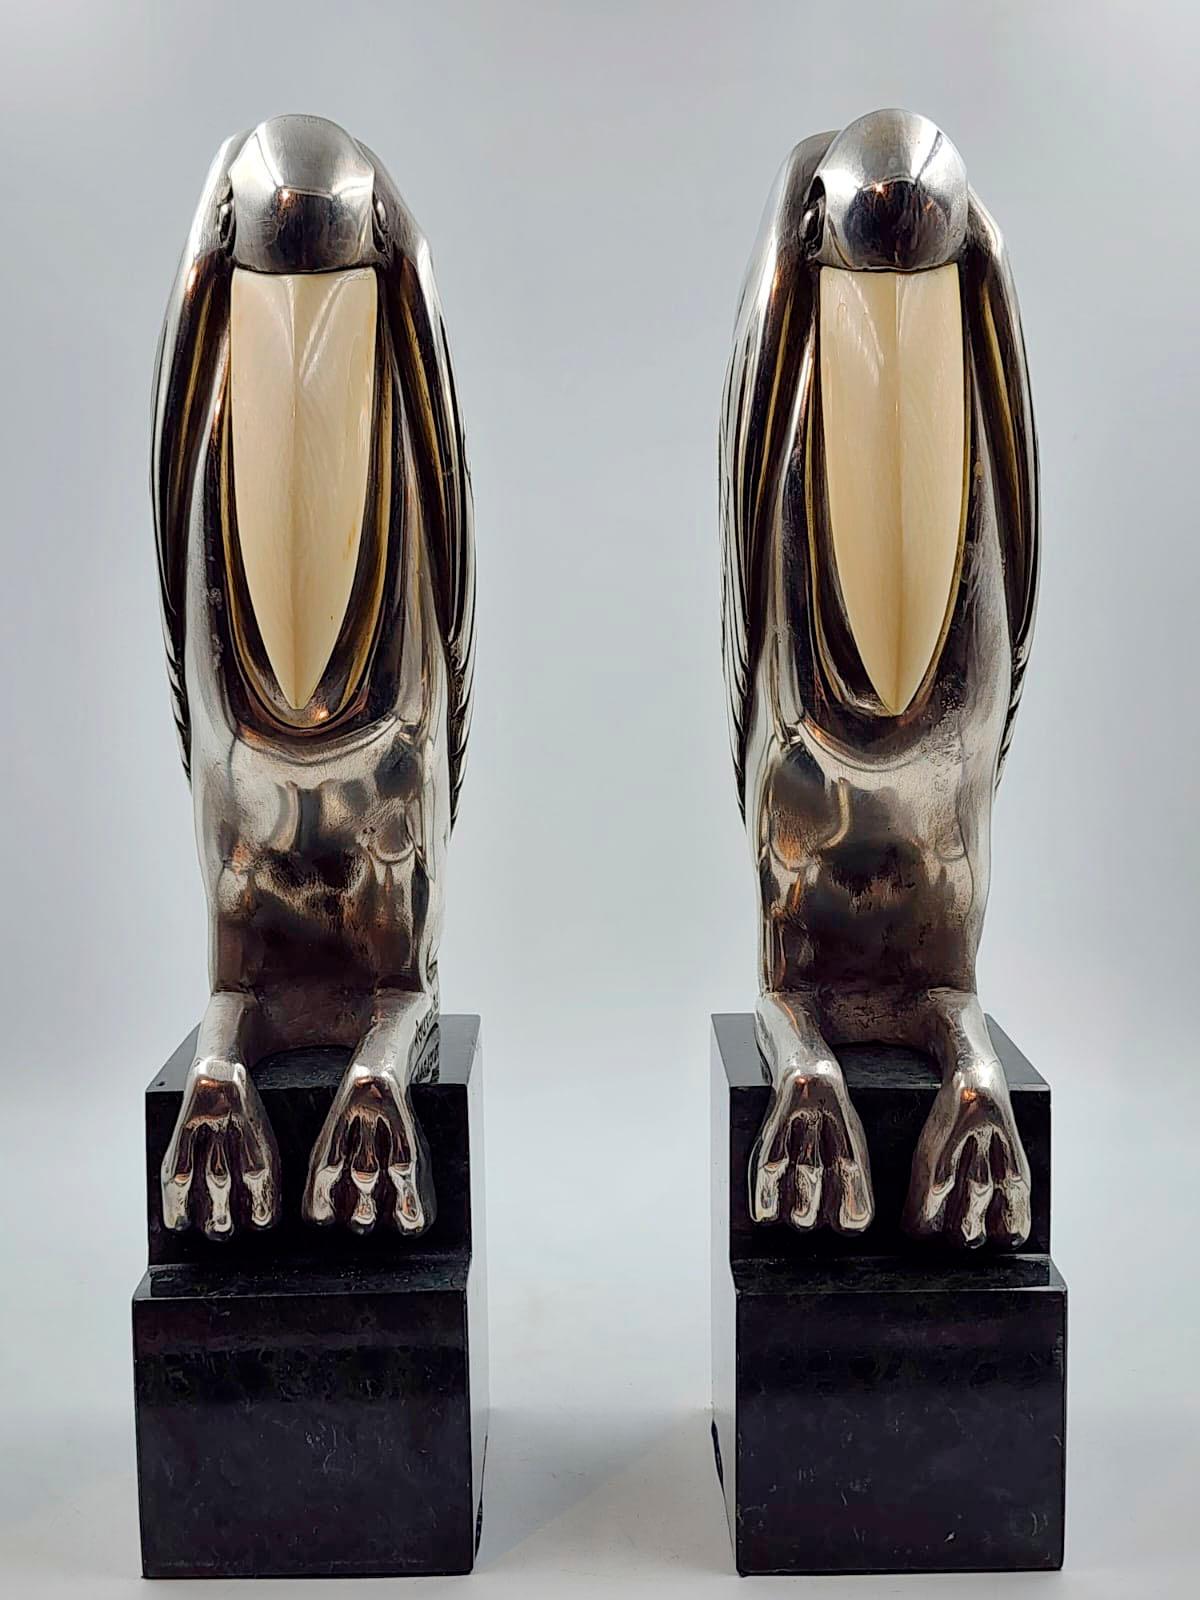 Art Deco Silver Metal Bookends with Malabu by Marcel-André Bouraine

These Art Deco bookends by Marcel Bouraine are playful pieces made of silvered bronze and mounted on marble, which has a step to give more power to the work.

Bouraine made